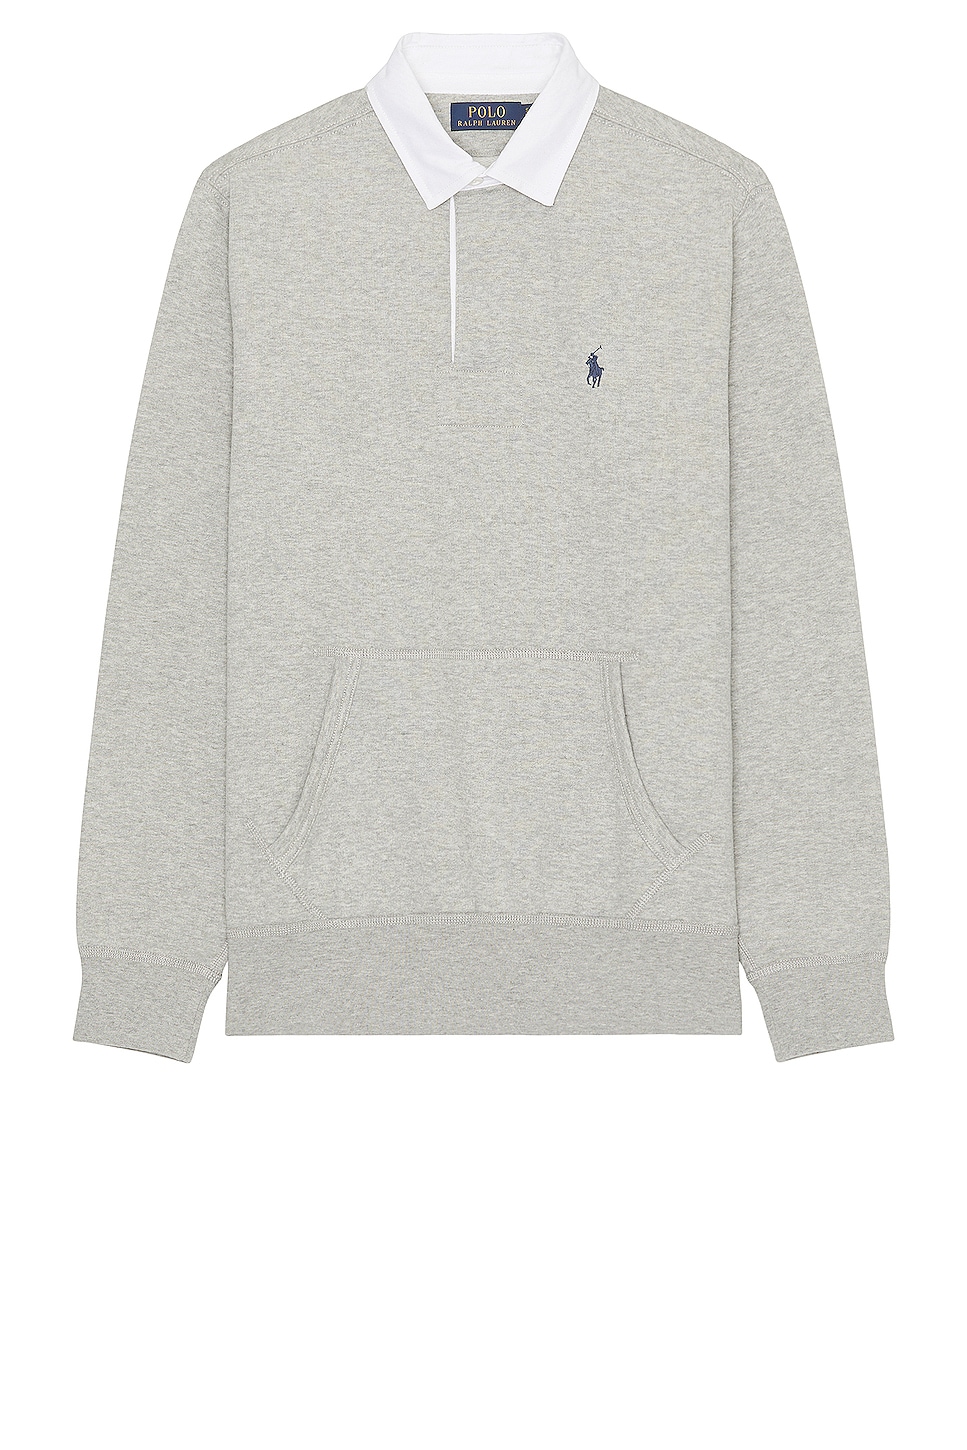 Image 1 of Polo Ralph Lauren Long Sleeve Polo in Andover Heather